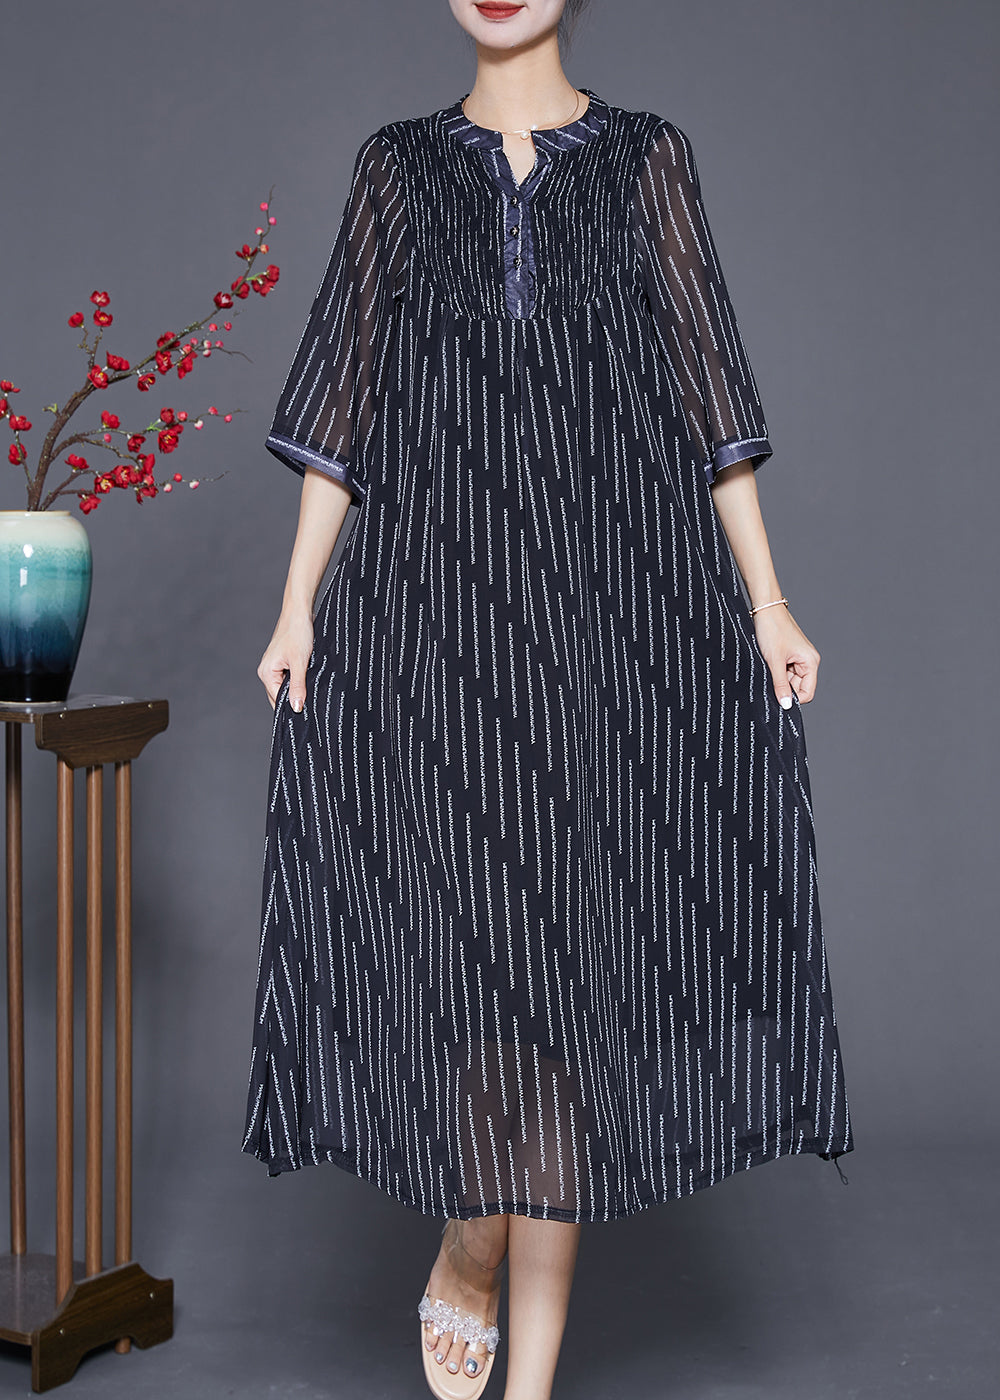 French Black Striped Wrinkled Draping Chiffon Dresses Summer